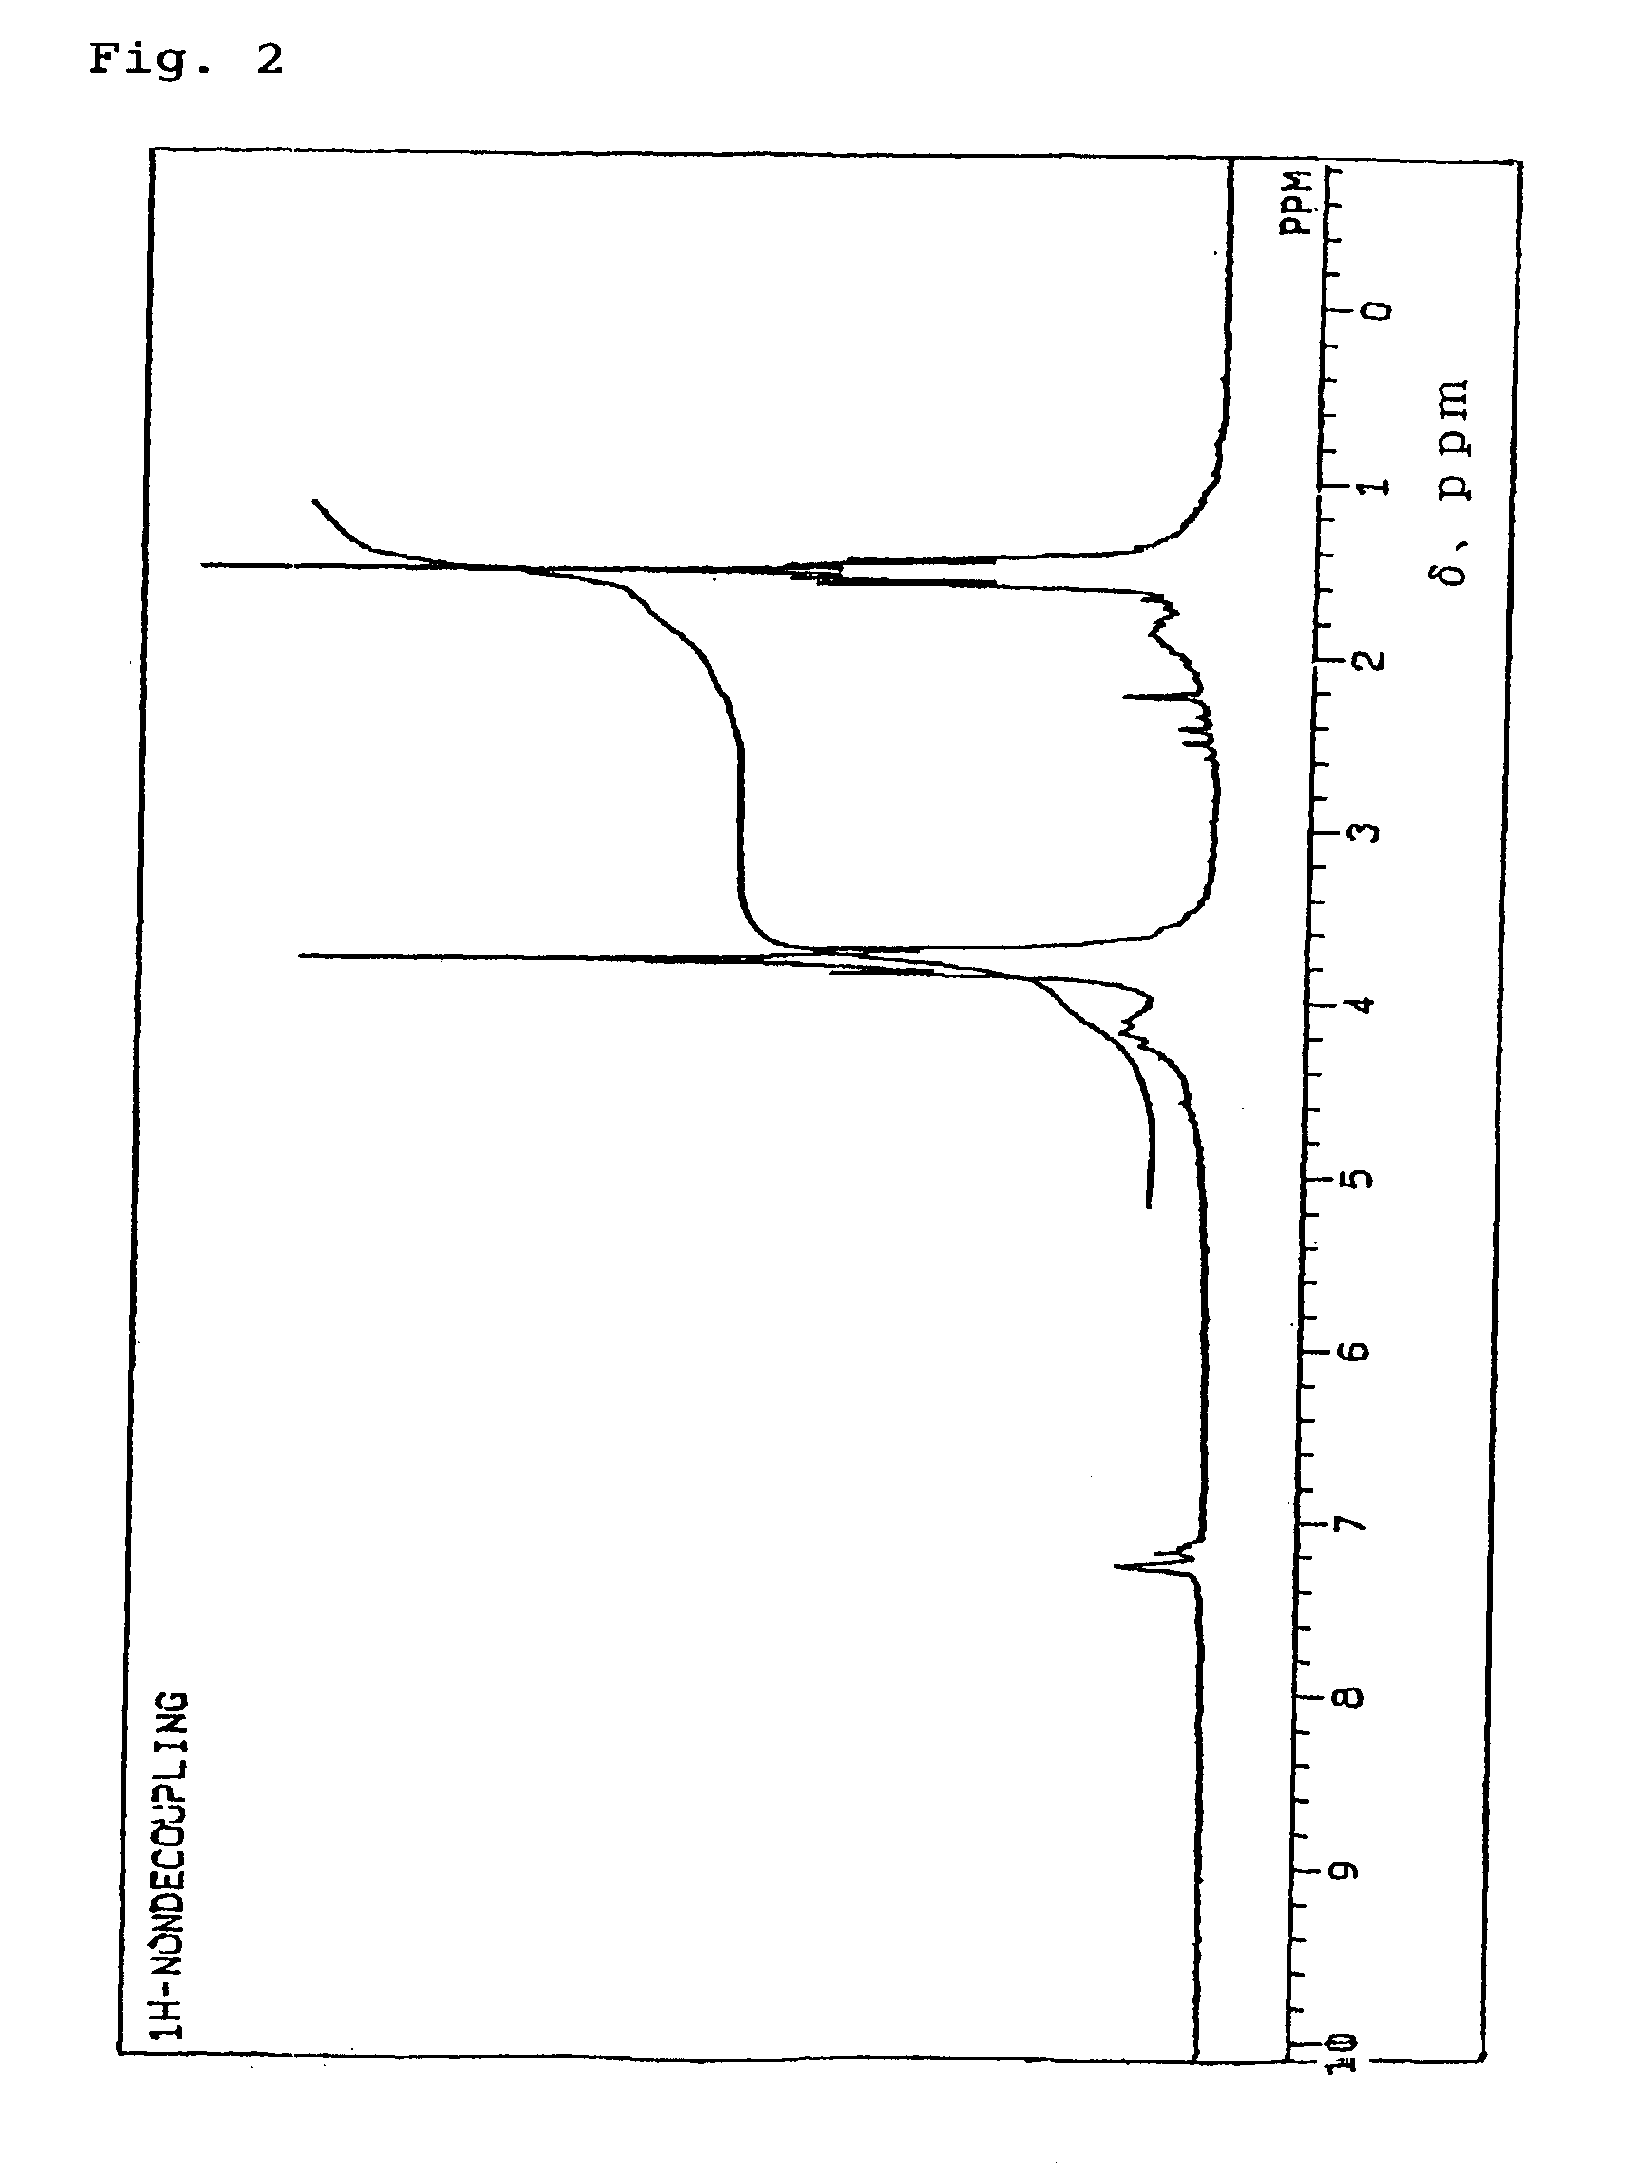 Conductive film forming composition, conductive film, and method for forming the same